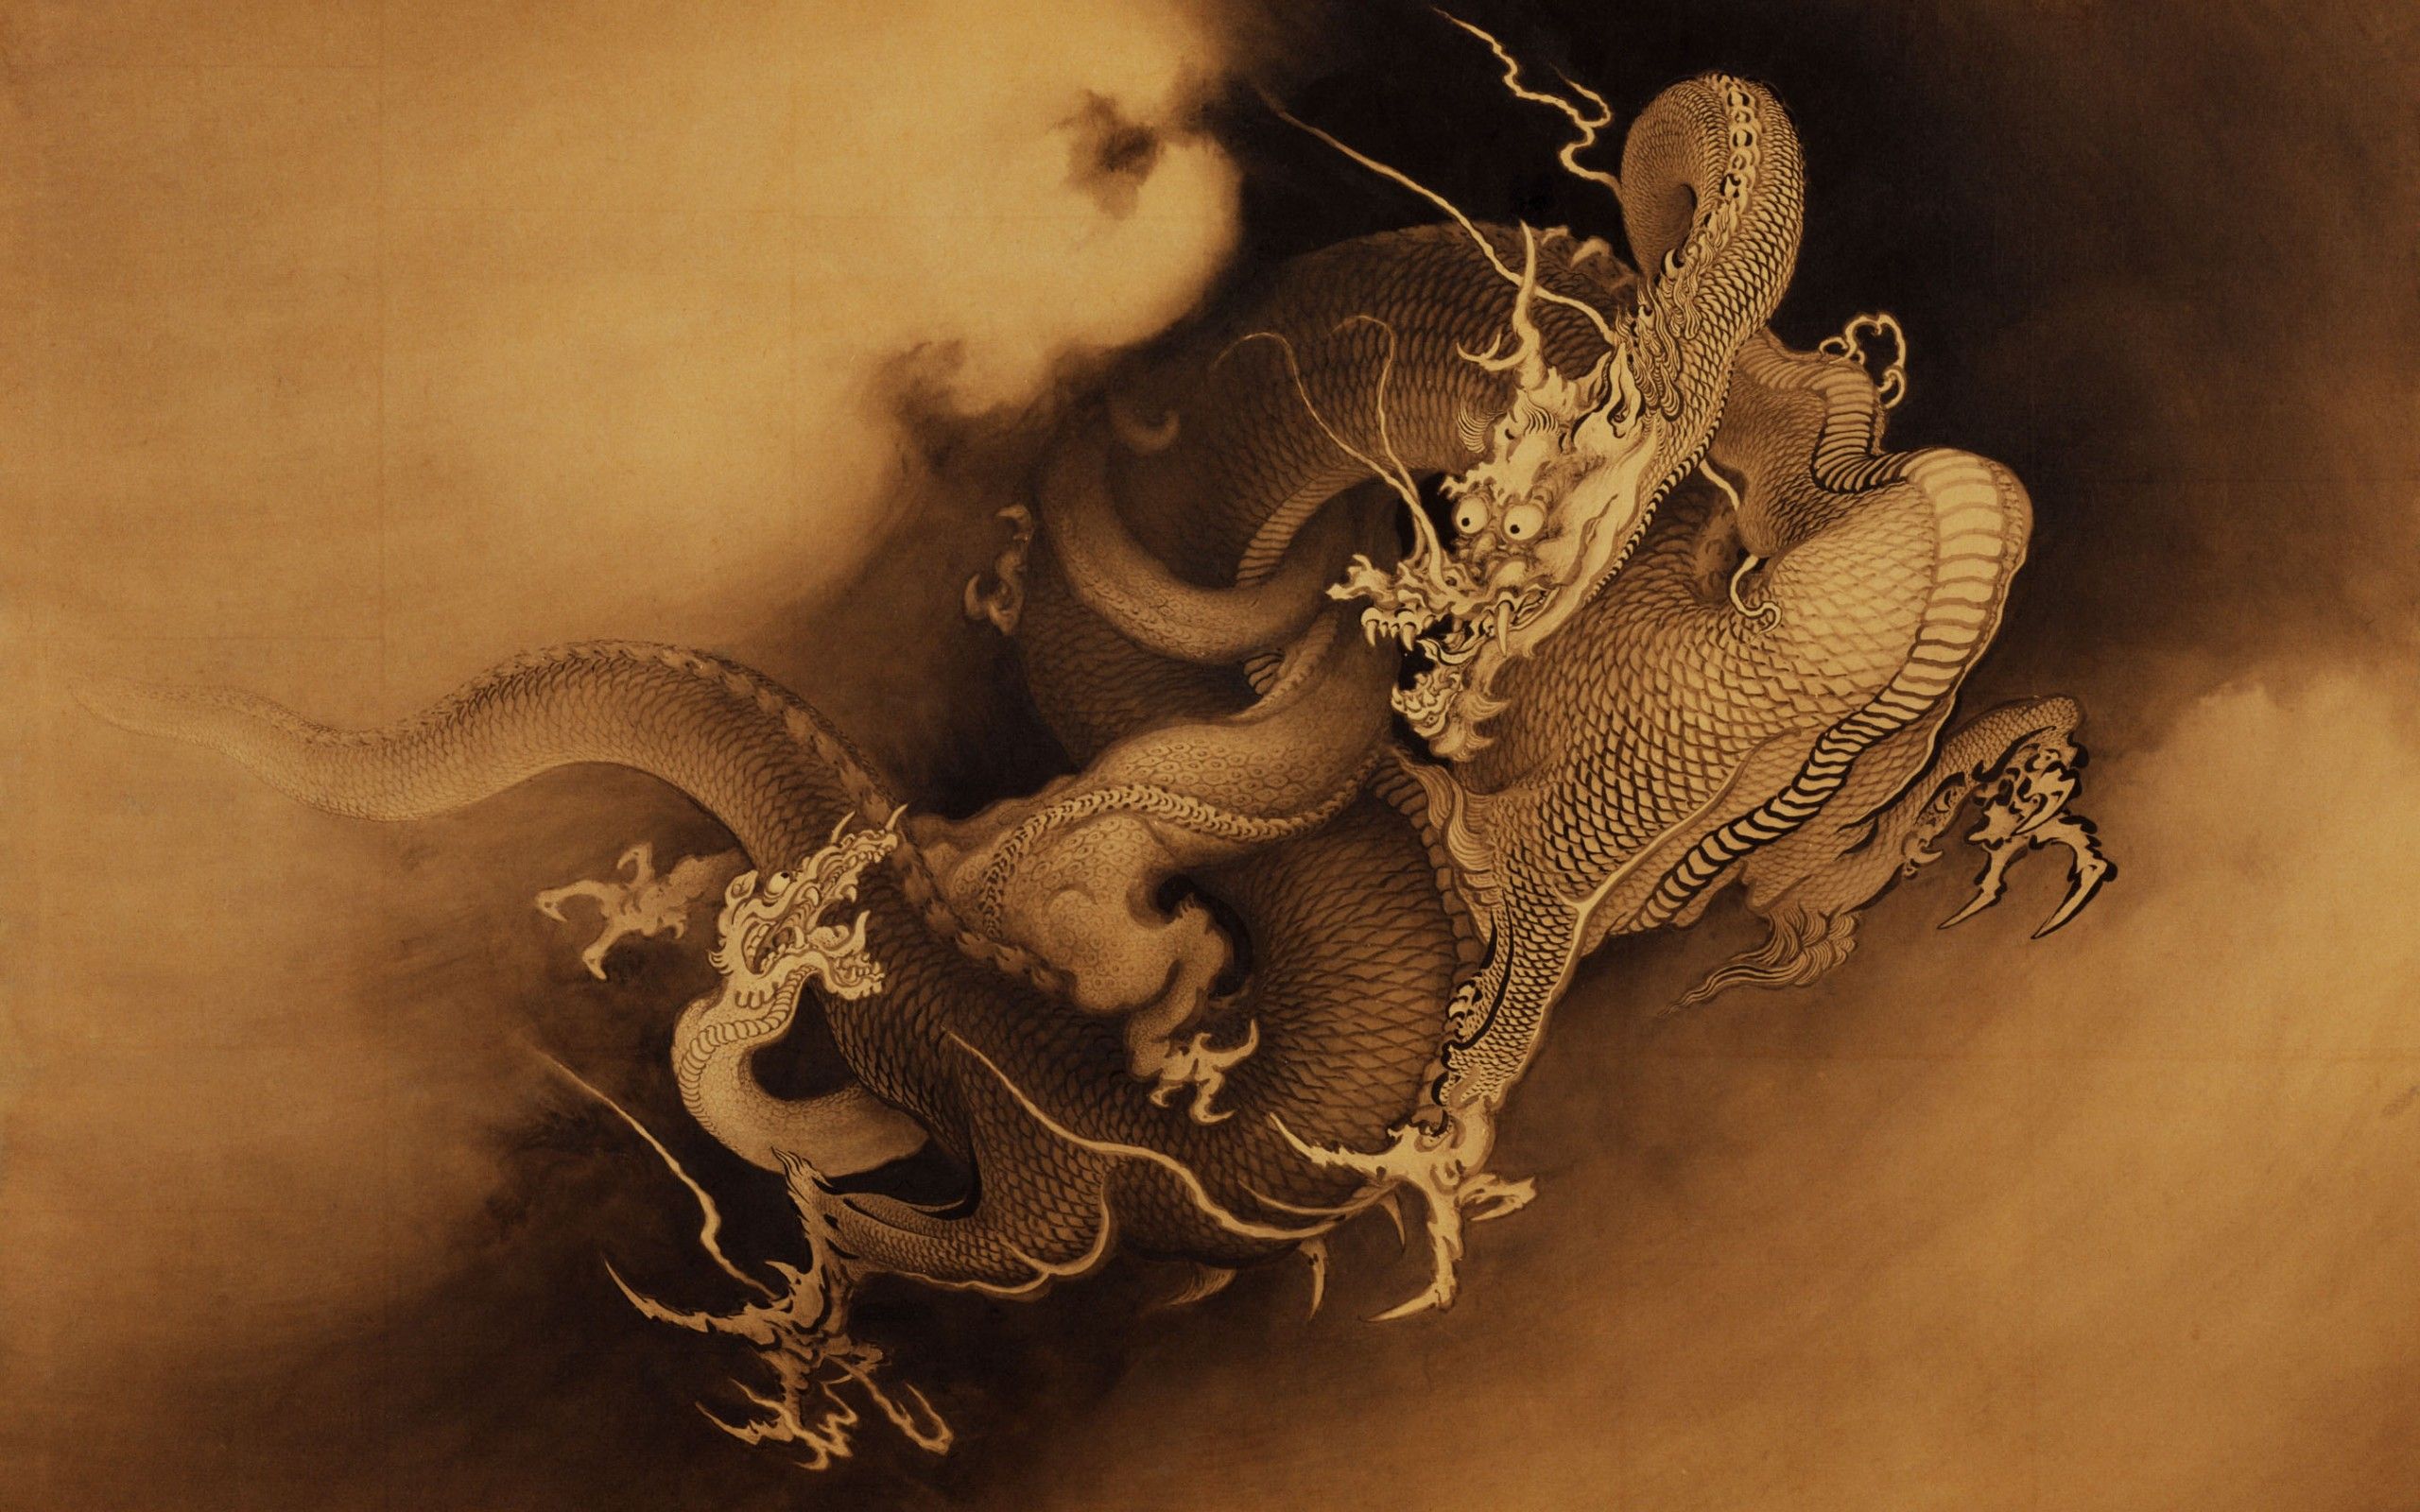 15 Chinese Dragon HD Wallpapers | Backgrounds - Wallpaper Abyss